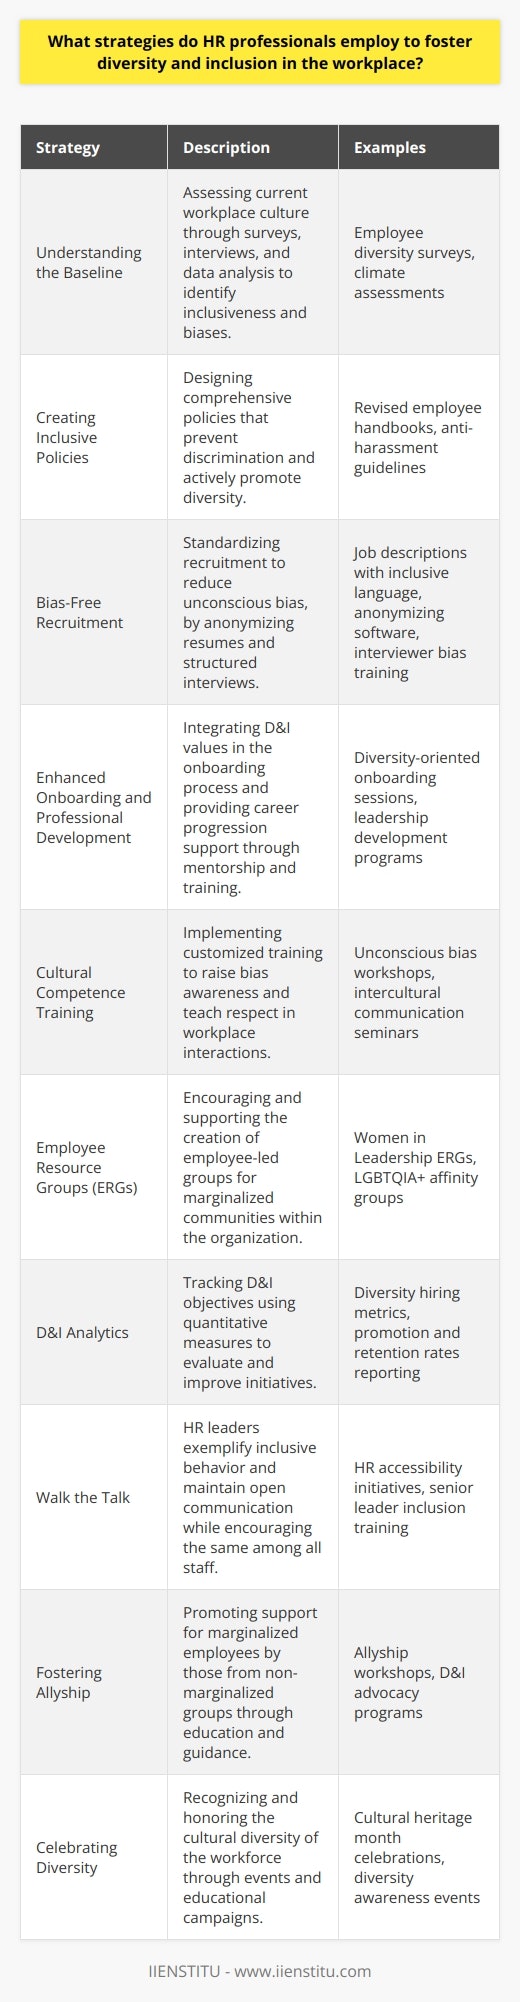 HR professionals are increasingly becoming the stewards of workplace culture, especially when it comes to embedding diversity and inclusion (D&I) within organizational DNA. Here's how they are accomplishing this critical task:**Understanding the Baseline**HR starts by gauging the current organizational cultural climate through employee surveys, interviews, and data analysis. Understanding the baseline demographics and the presence (or absence) of inclusive practices is fundamental. Additionally, they may assess the inclusiveness of internal communications, policies, and employee relations to identify biases or exclusionary patterns.**Creating Inclusive Policies**HR professionals develop and articulate clear, comprehensive policies that inhibit discrimination and foster diversity. This may involve revisiting the employee handbook, codes of conduct, anti-harassment policies, and grievance procedures to ensure they are aligned with D&I goals.**Bias-Free Recruitment**By standardizing recruitment procedures—writing job descriptions that attract a diverse applicant pool, employing software to anonymize resumes, and providing interviewer training—HR professionals minimize unconscious bias. They implement structured interviews with a set of predetermined questions for all candidates to ensure fairness and consistency.**Enhanced Onboarding and Professional Development**A strategic onboarding process that acquaints new hires with an organization’s D&I values from day one sets the stage for inclusive behavior. Additionally, offering mentorship programs and leadership training ensures diverse talent is recognized and prepared for advancement opportunities.**Cultural Competence Training**Tailored D&I training programs elevate awareness of unconscious biases and equip employees with skills to interact respectfully with diverse colleagues. HR curates these sessions, ensuring relatability through scenarios that reflect the organization’s specific context and challenges.**Employee Resource Groups (ERGs)**The facilitation of ERGs is one of the more empowering strategies. HR provides the frameworks for their formation and operation but steps back to allow genuine employee ownership. These groups are instrumental in voicing the concerns of marginalized communities within the organization.**D&I Analytics**Data-driven approaches involve setting clear and quantifiable D&I objectives. HR uses analytics to track diversity metrics, employee engagement, promotion rates, and exit interviews to draw insights and adapt strategies accordingly.**Walk the Talk**D&I is not just a policy—it's a practice. HR leaders must model inclusive behavior, demonstrating their commitment to the values they preach. For instance, they should be accessible, listen to employee feedback actively, and encourage senior leaders to do the same.**Fostering Allyship**Encouraging allies among employees who don't belong to marginalized groups can amplify D&I efforts. HR can set the stage for allyship through awareness-raising and outlining how allies can support their colleagues.**Celebrating Diversity**Planning and executing events or recognize special dates relevant to different cultures reinforces the value placed on diversity. HR can curate a calendar celebrating a wide array of cultural festivities, along with educational campaigns to promote understanding and appreciation.In summary, fostering diversity and inclusion is a multi-faceted endeavor requiring a strategic and sustained approach. By assessing, policymaking, educating, and celebrating, HR professionals create a workplace fabric that is reflective of the diverse world we inhabit, ultimately driving innovation, employee satisfaction, and organizational success.